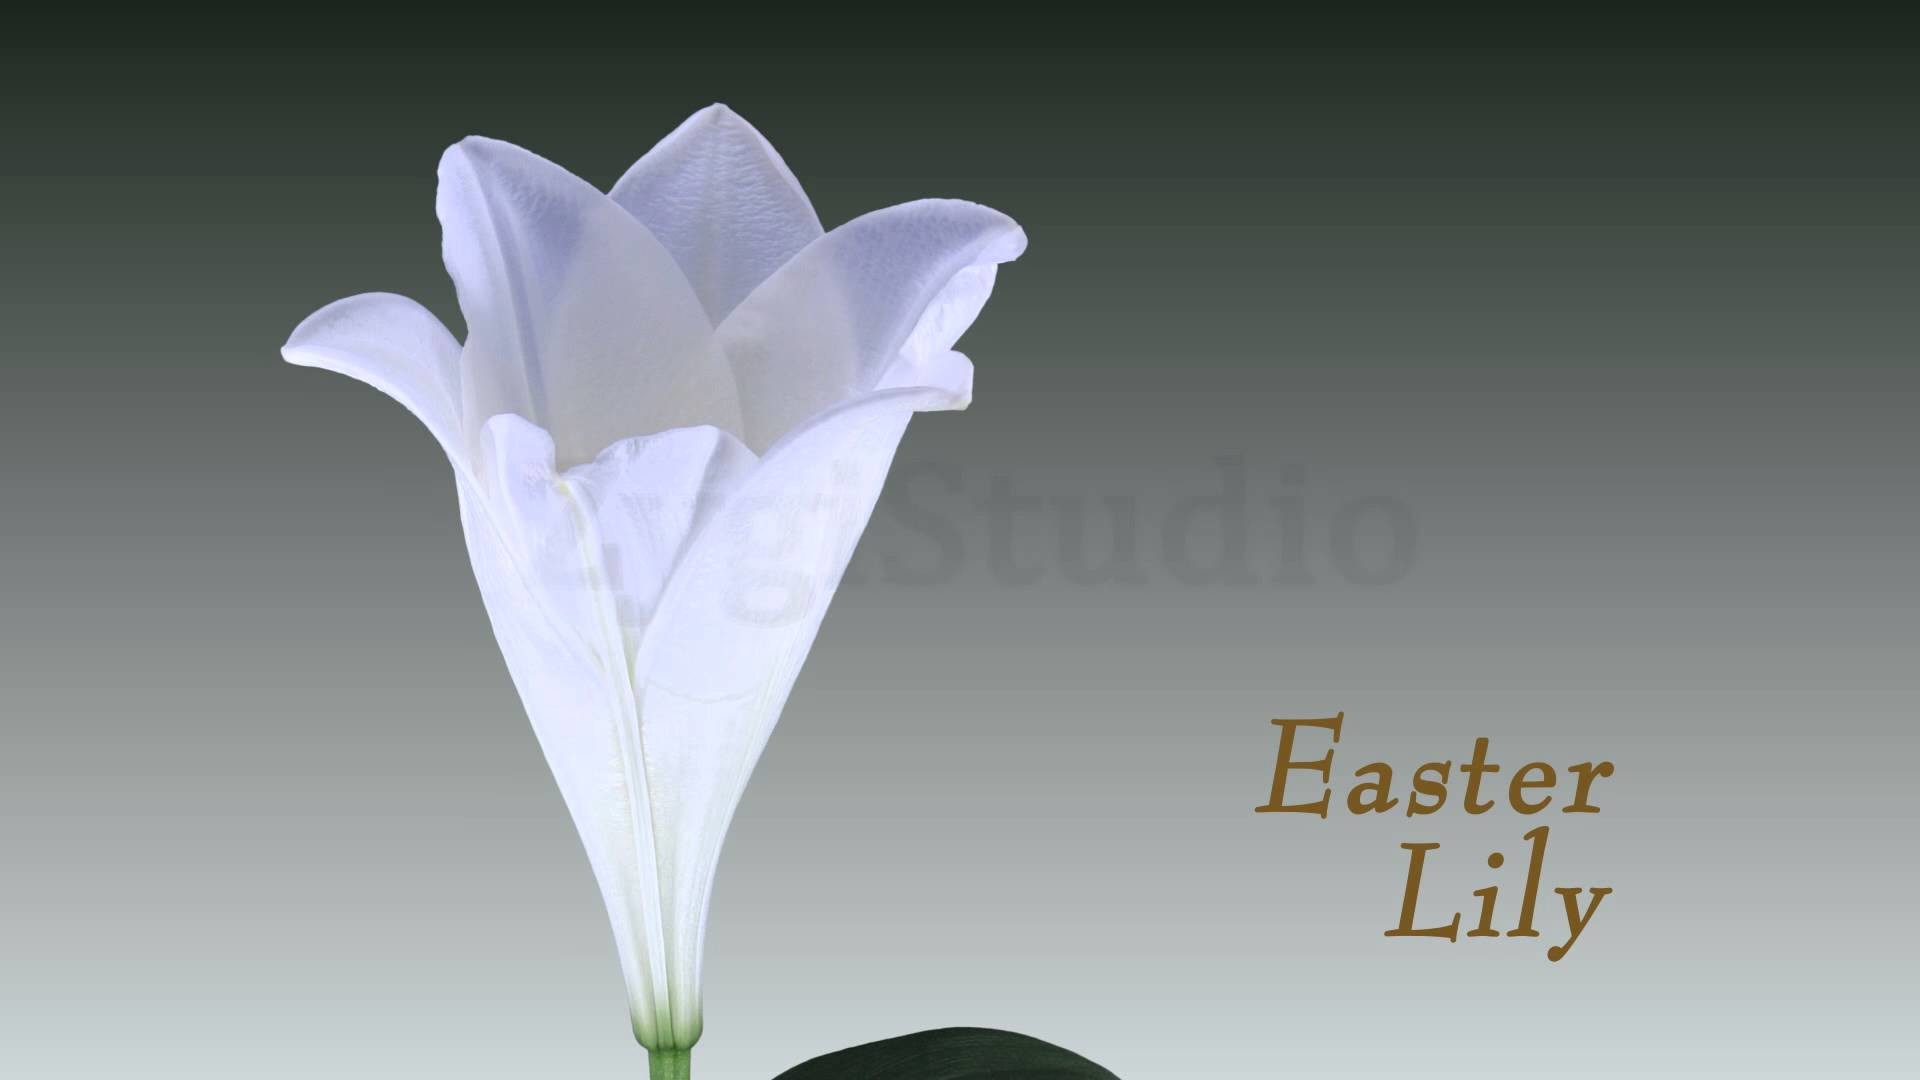 Time lapse of Opening White Easter Lily